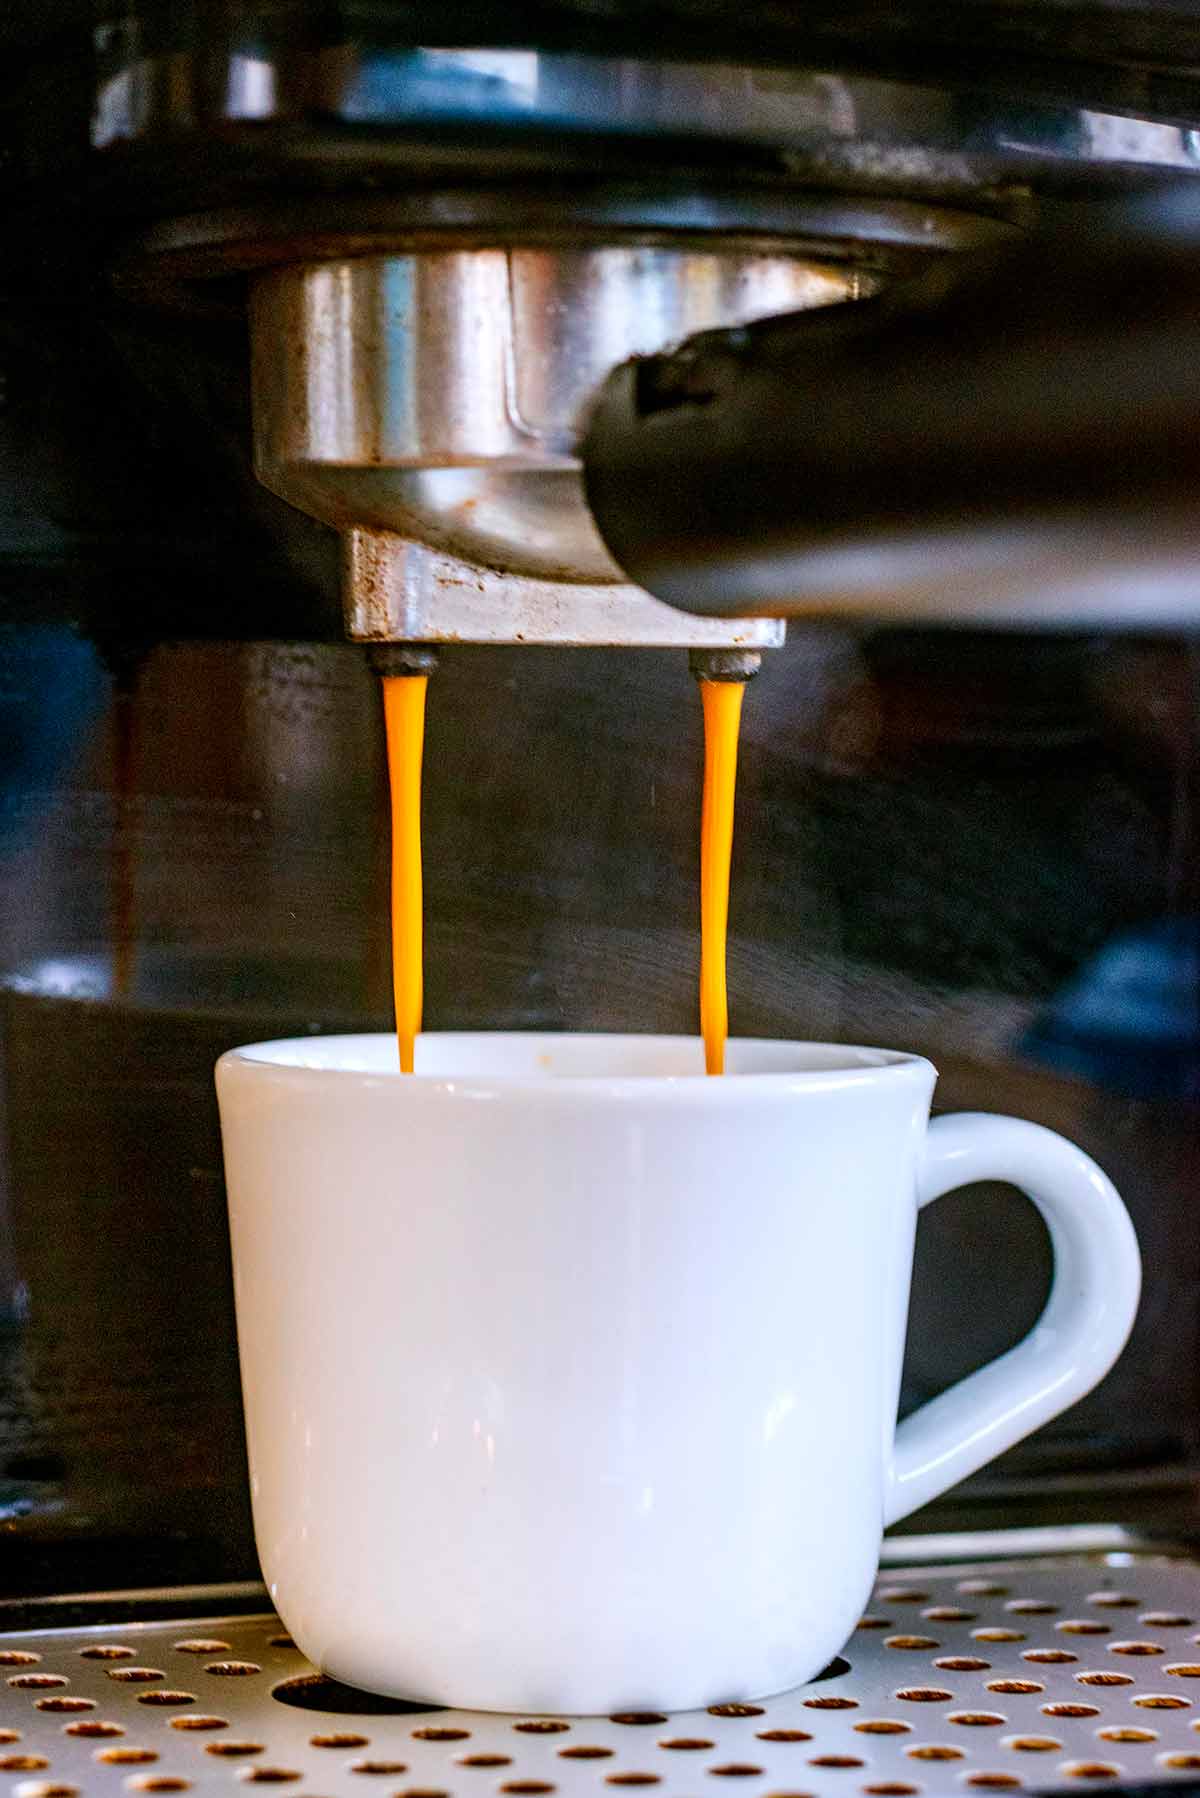 Coffee being brewed into an espresso cup.